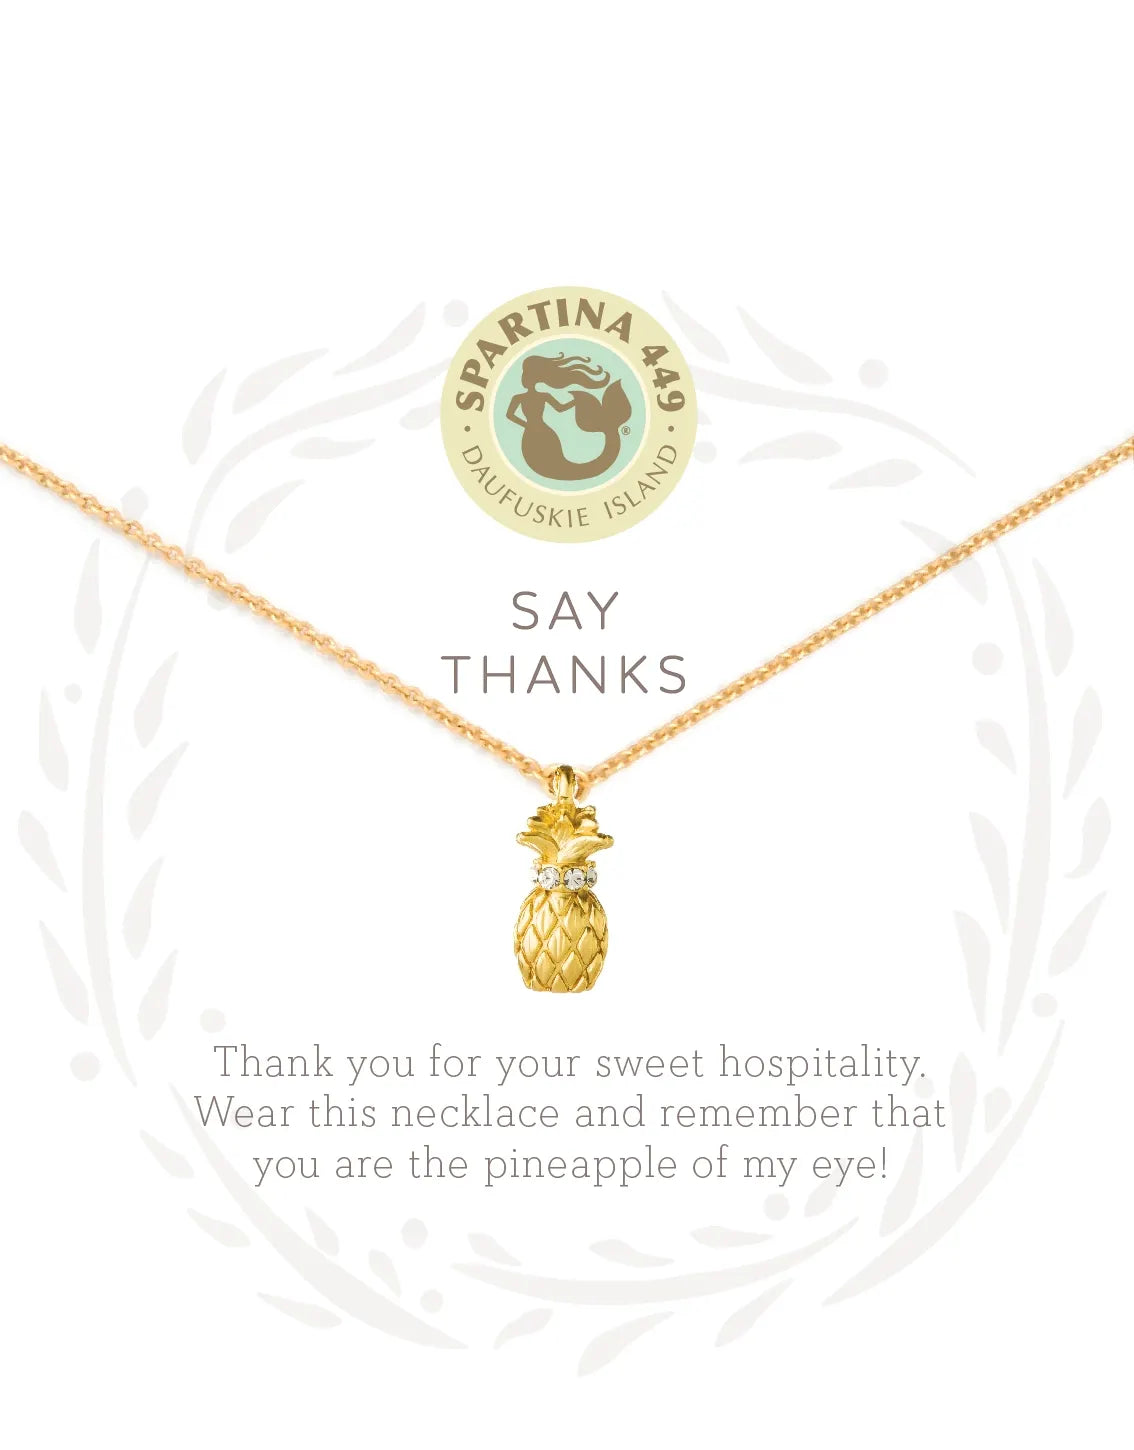 Spartina Necklace - Say Thanks